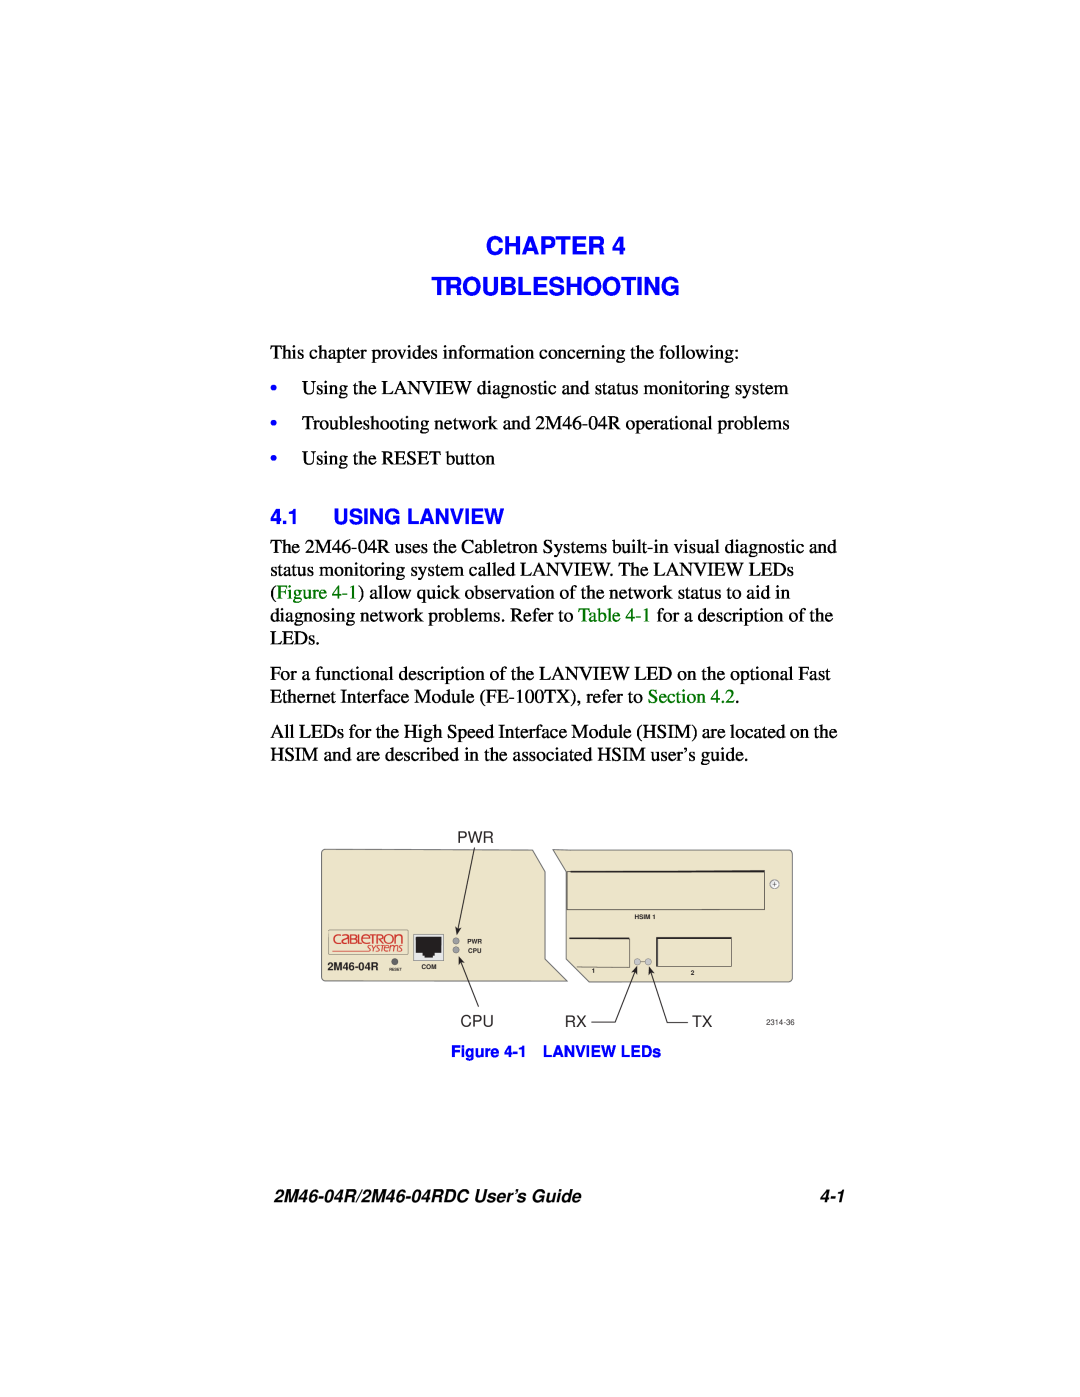 Cabletron Systems pmn manual Chapter Troubleshooting, Using Lanview 